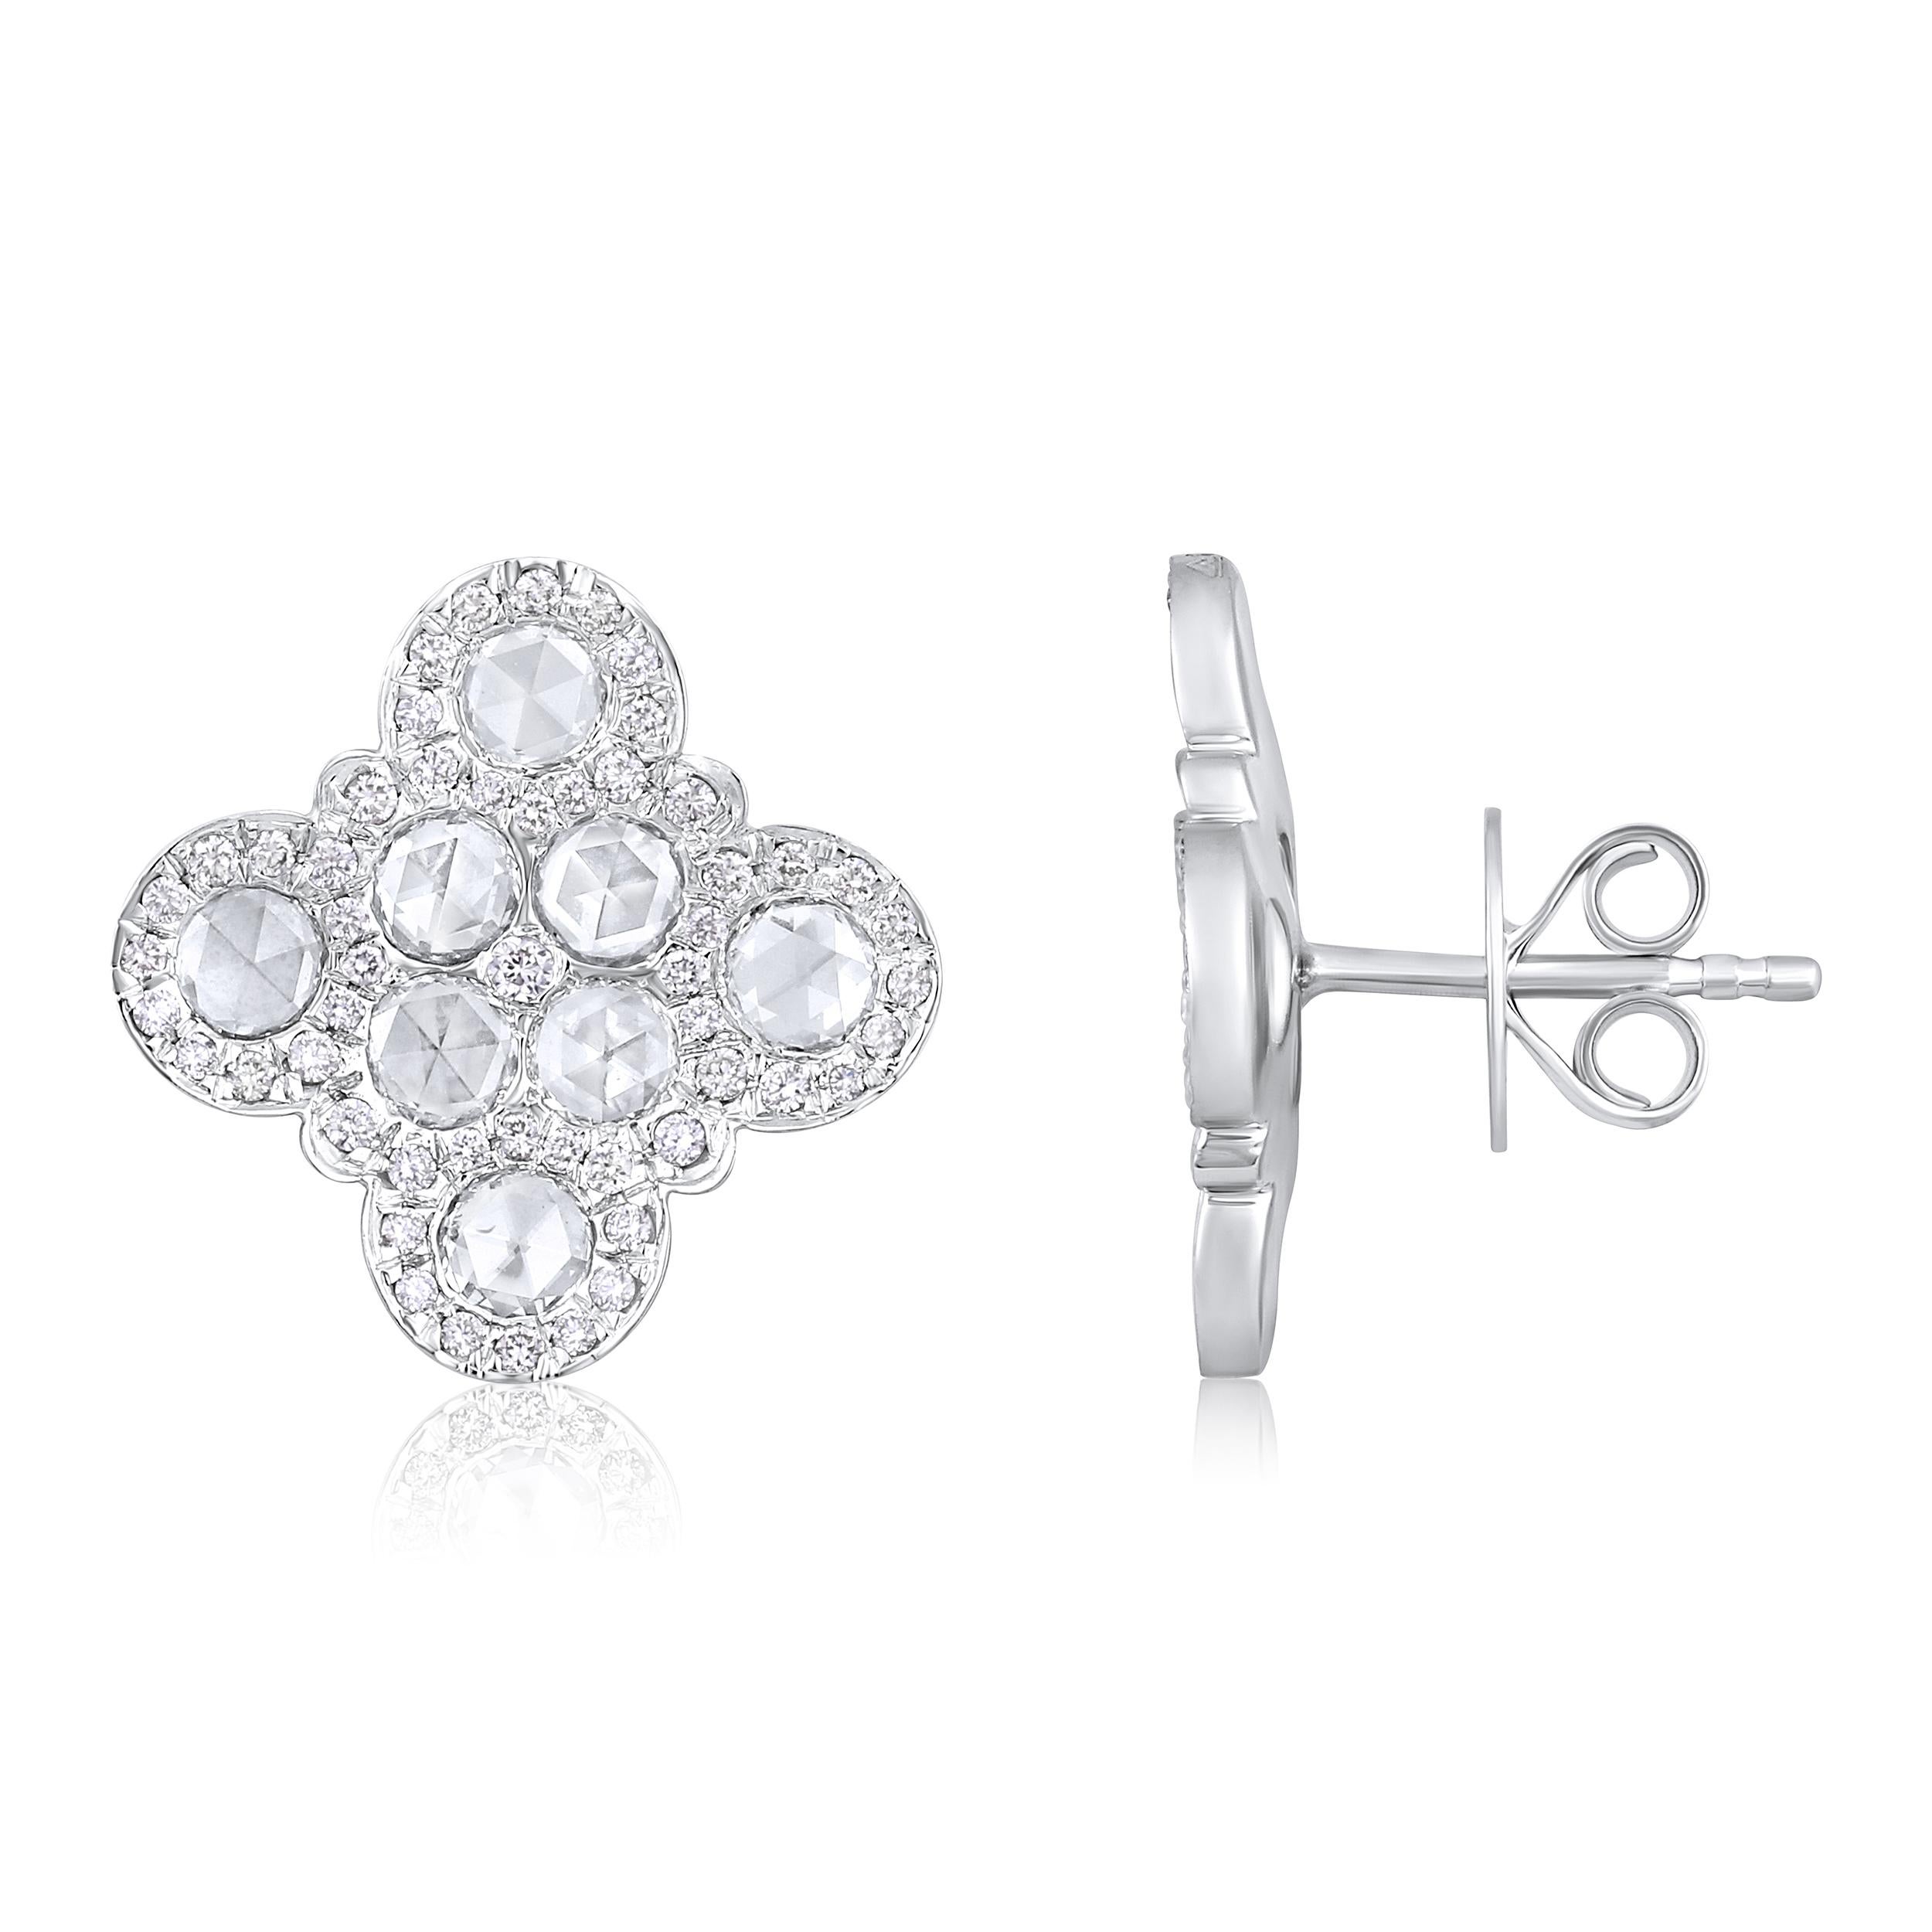 Crafted in 5.95 grams of 18K White Gold, the earrings contain 16 stones of Rose Cut Natural Diamonds with a total of 1.25 carat in E-F color and VVS-VS clarity combined with 106 stones of Round Natural Diamonds with a total of 0.38 carat in E-F